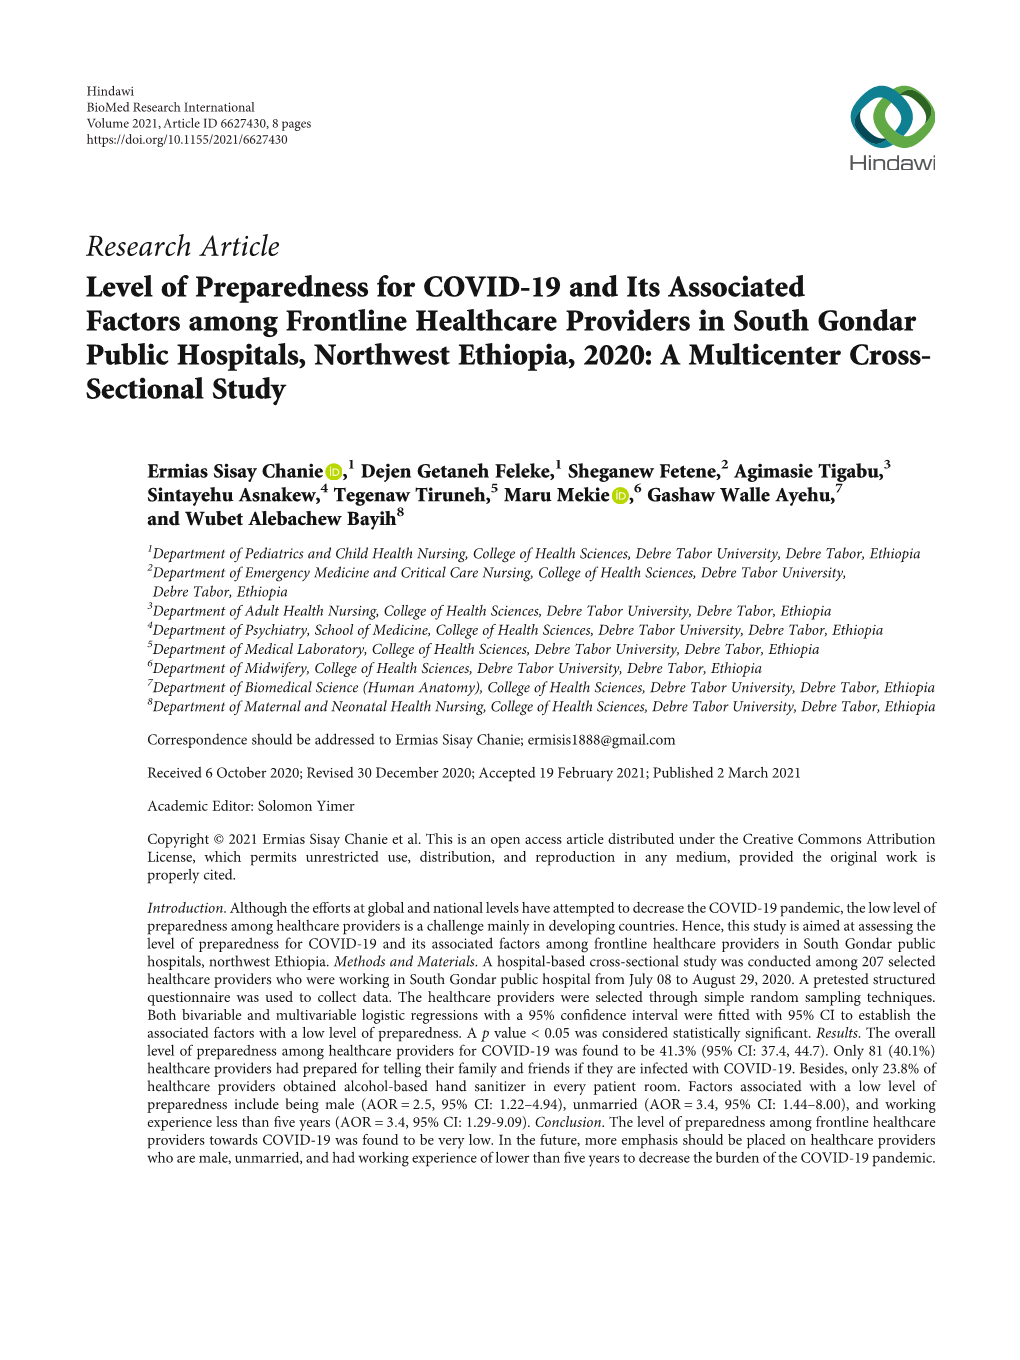 Research Article Level of Preparedness for COVID-19 and Its Associated Factors Among Frontline Healthcare Providers in South